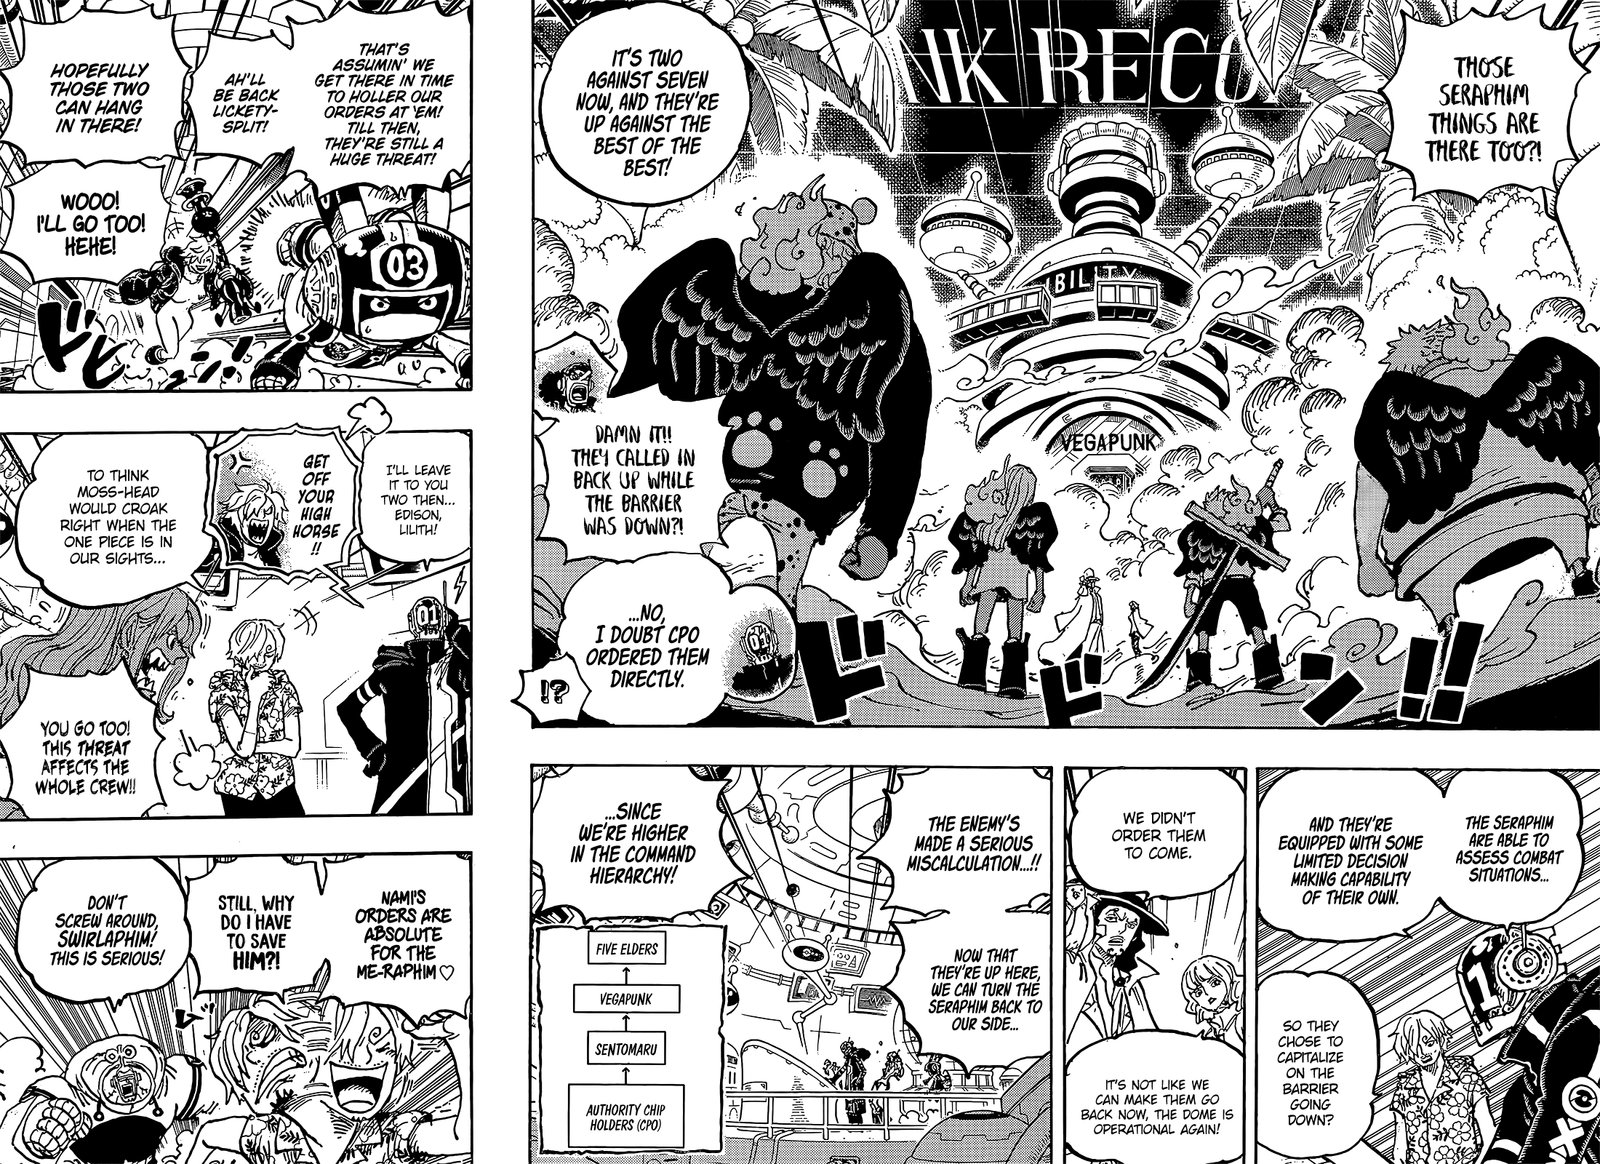 One Piece, Chapter 1072 - One-Piece Manga Online